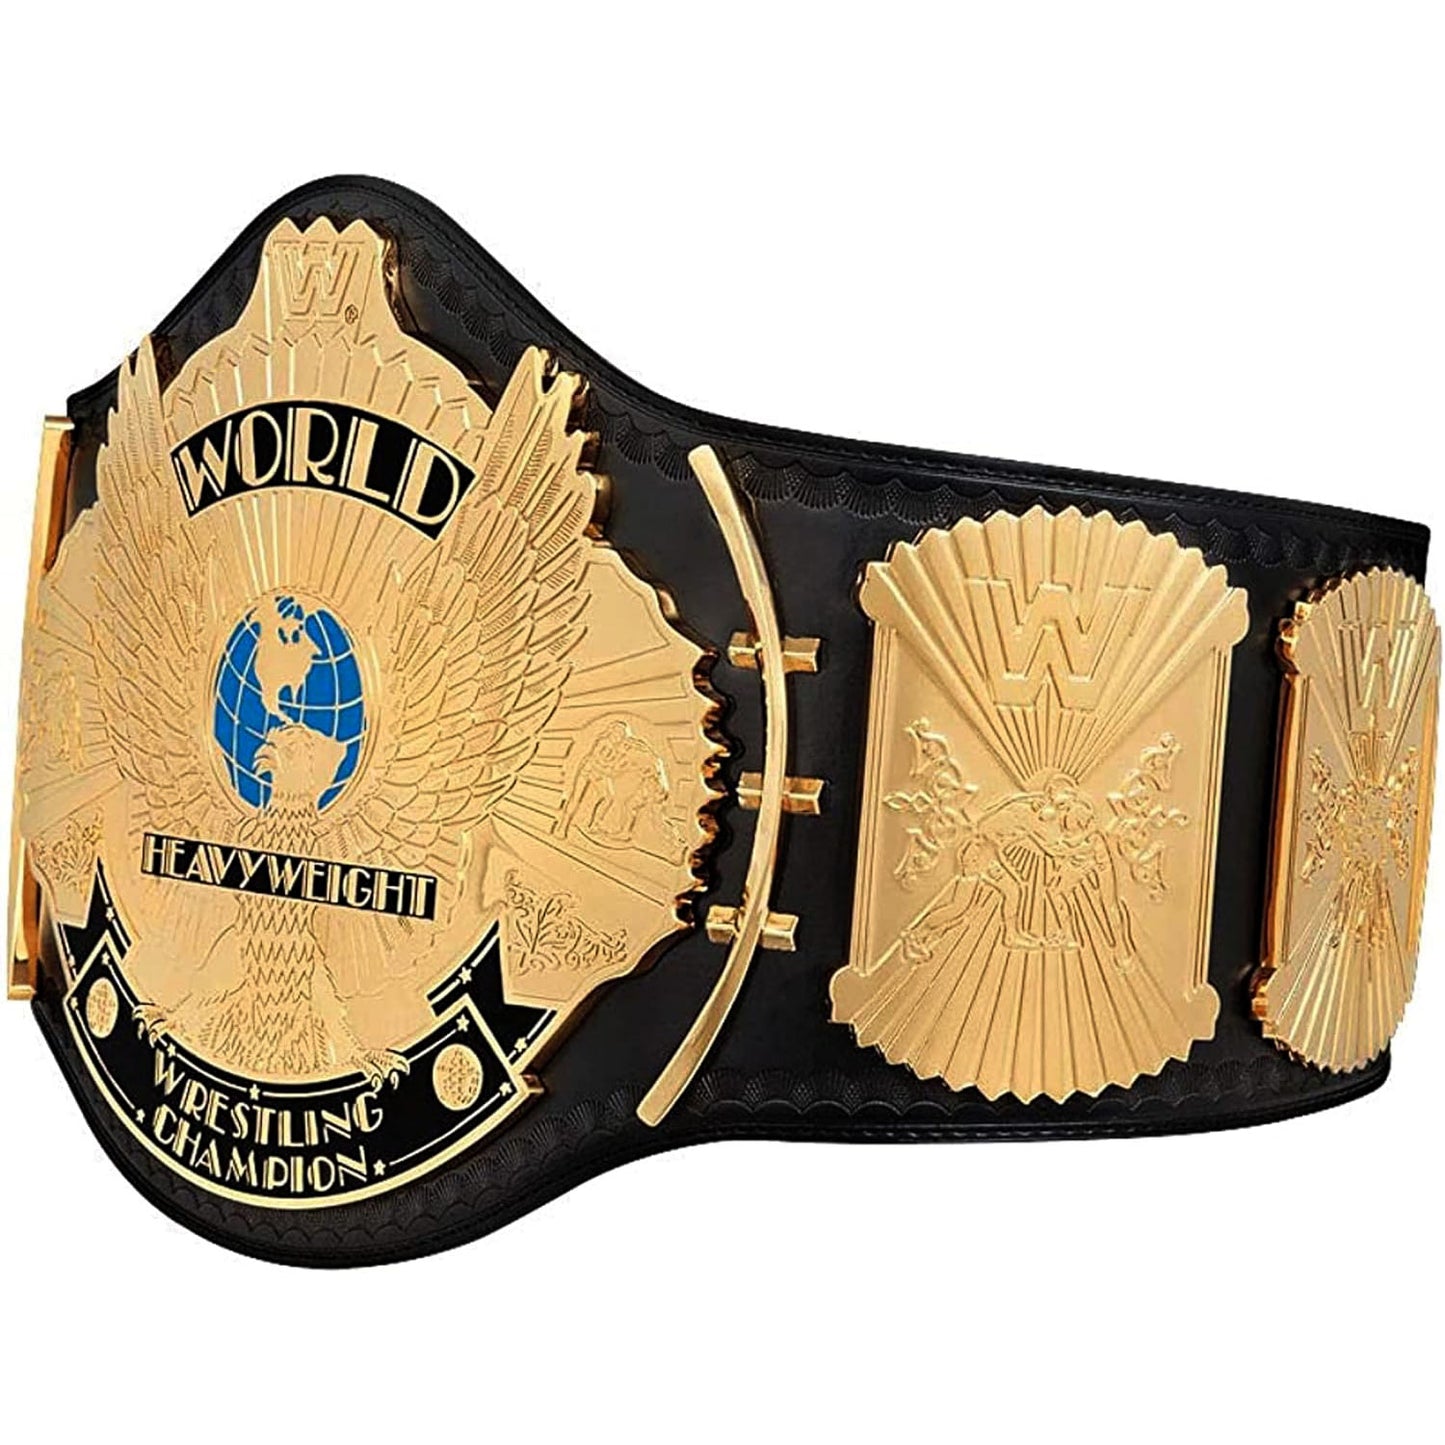 TRUESAGA - Winged Eagle Wrestling Championship Belt Class One Replica - Adult Waist Size Up to 46" - 2mm Metal Plate Genuine Leather Base